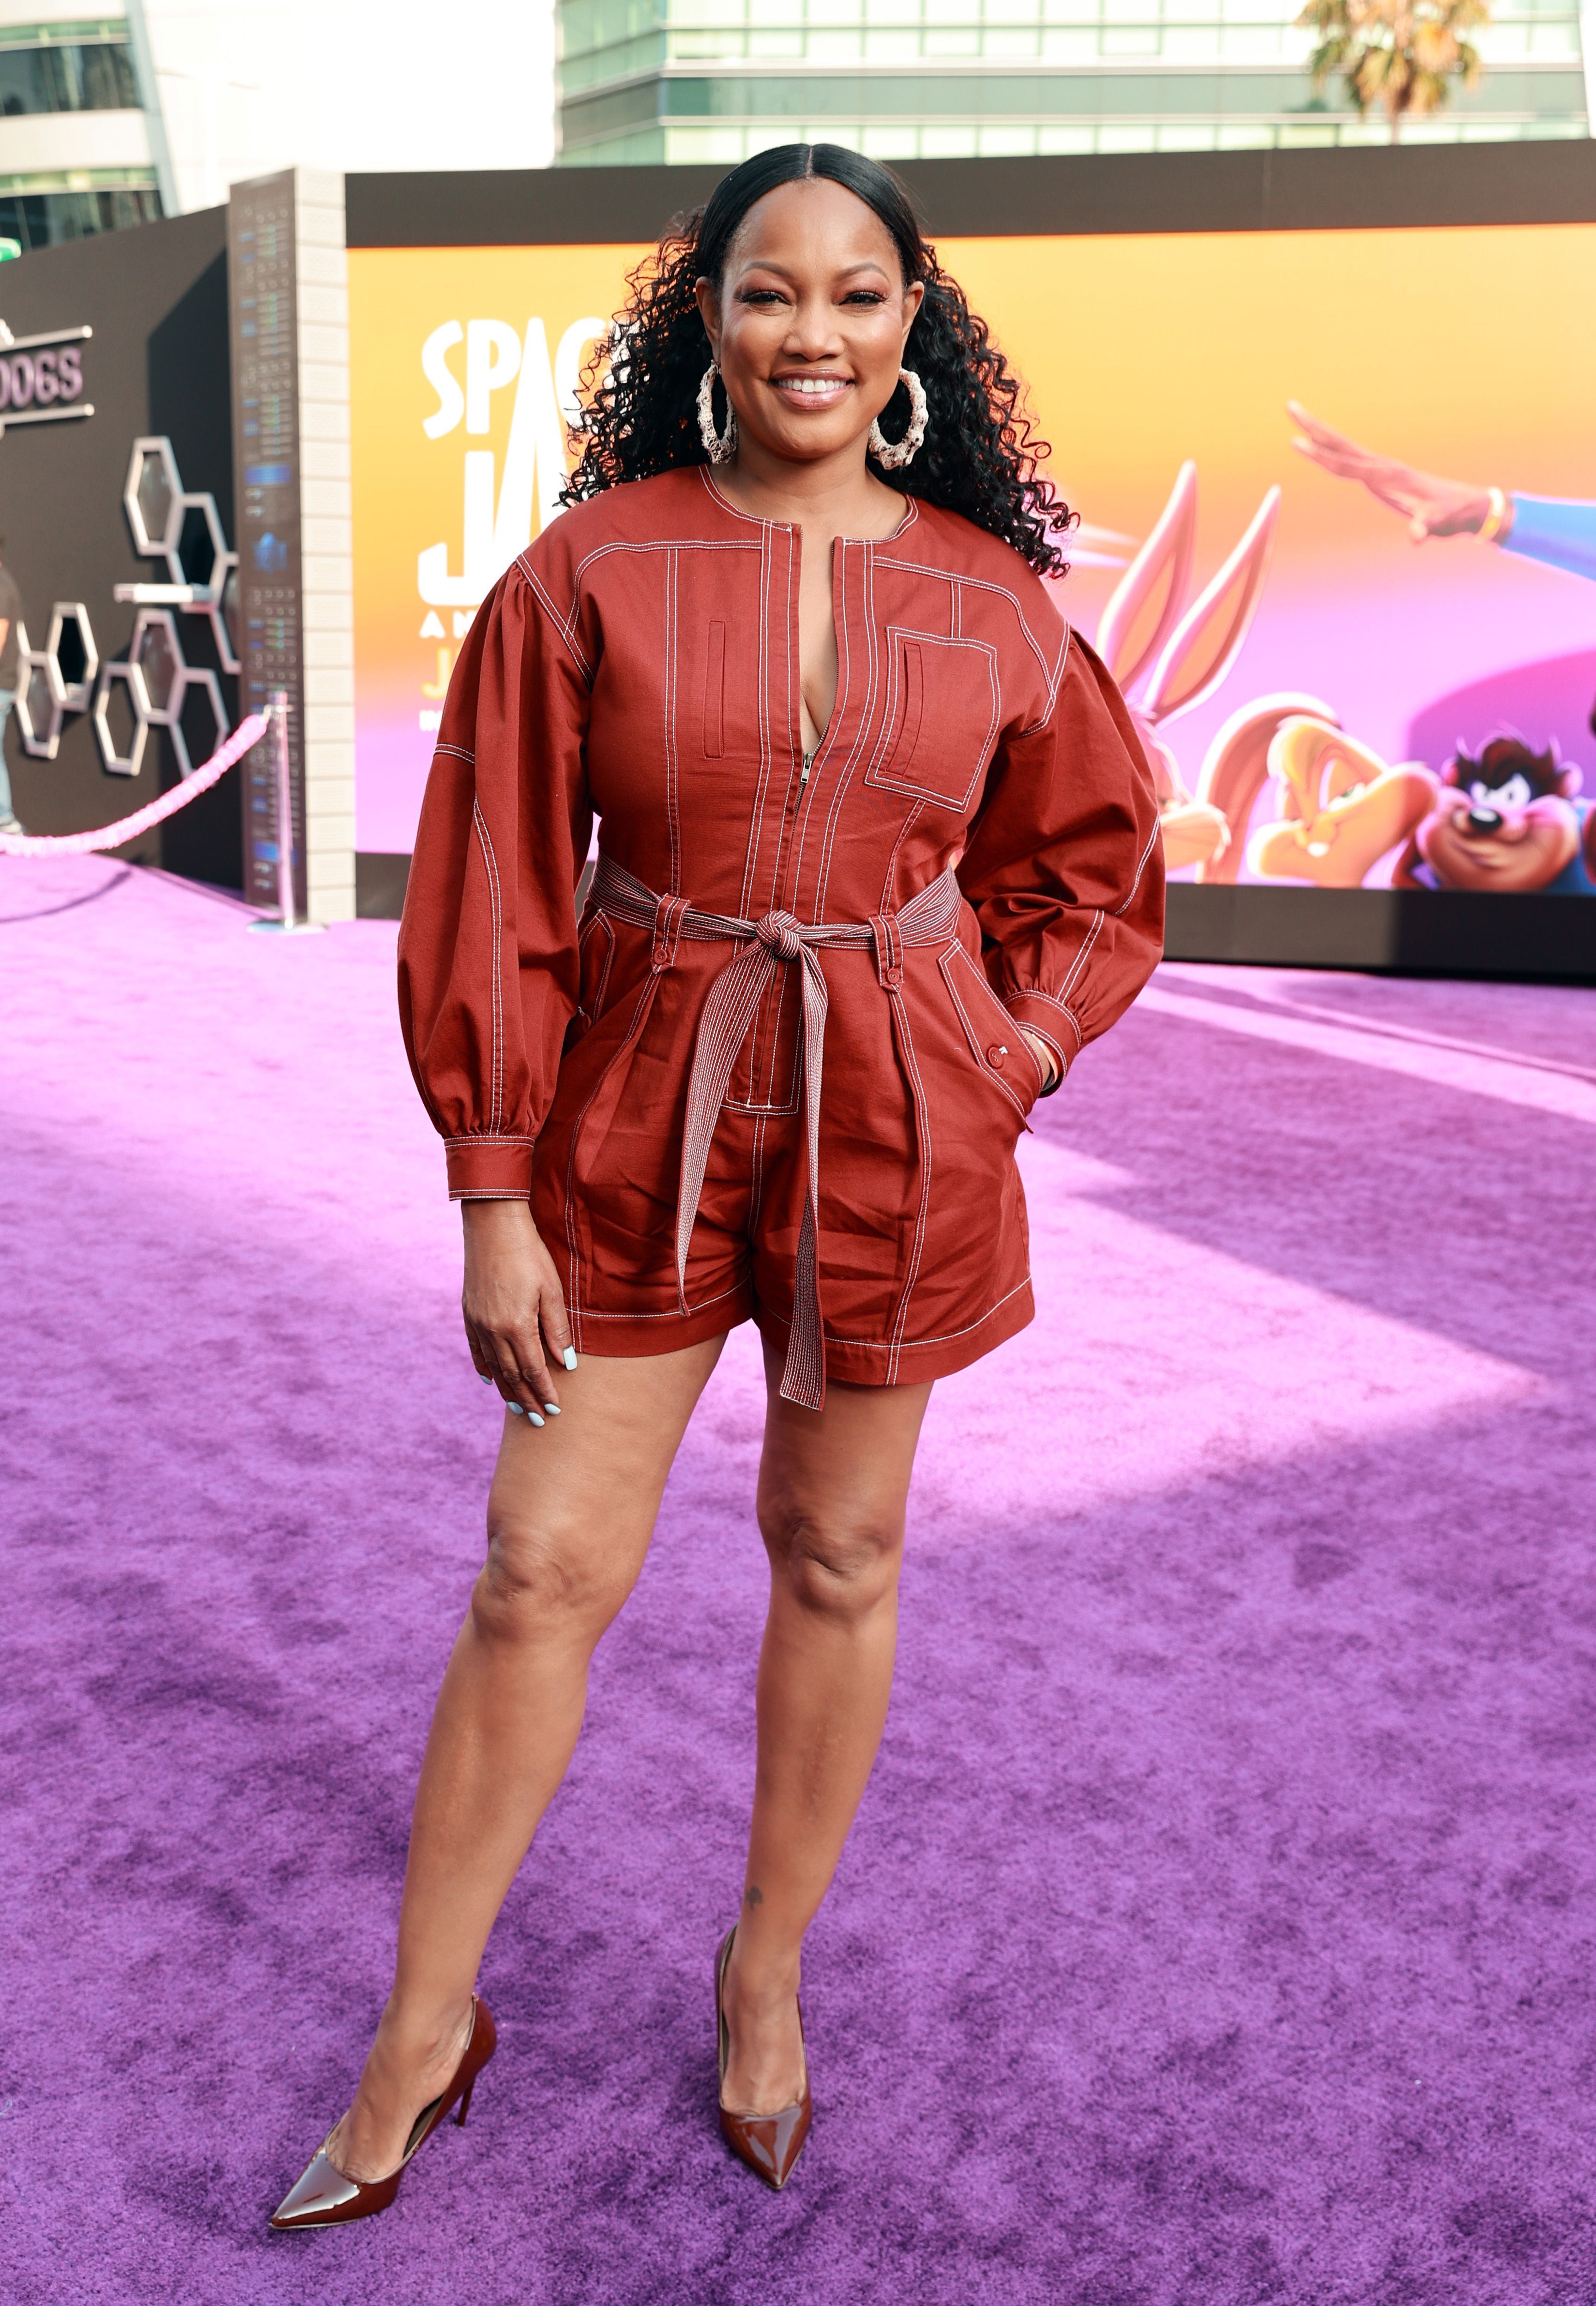 Garcelle Beauvais wears a red romper and gold hoop earrings.